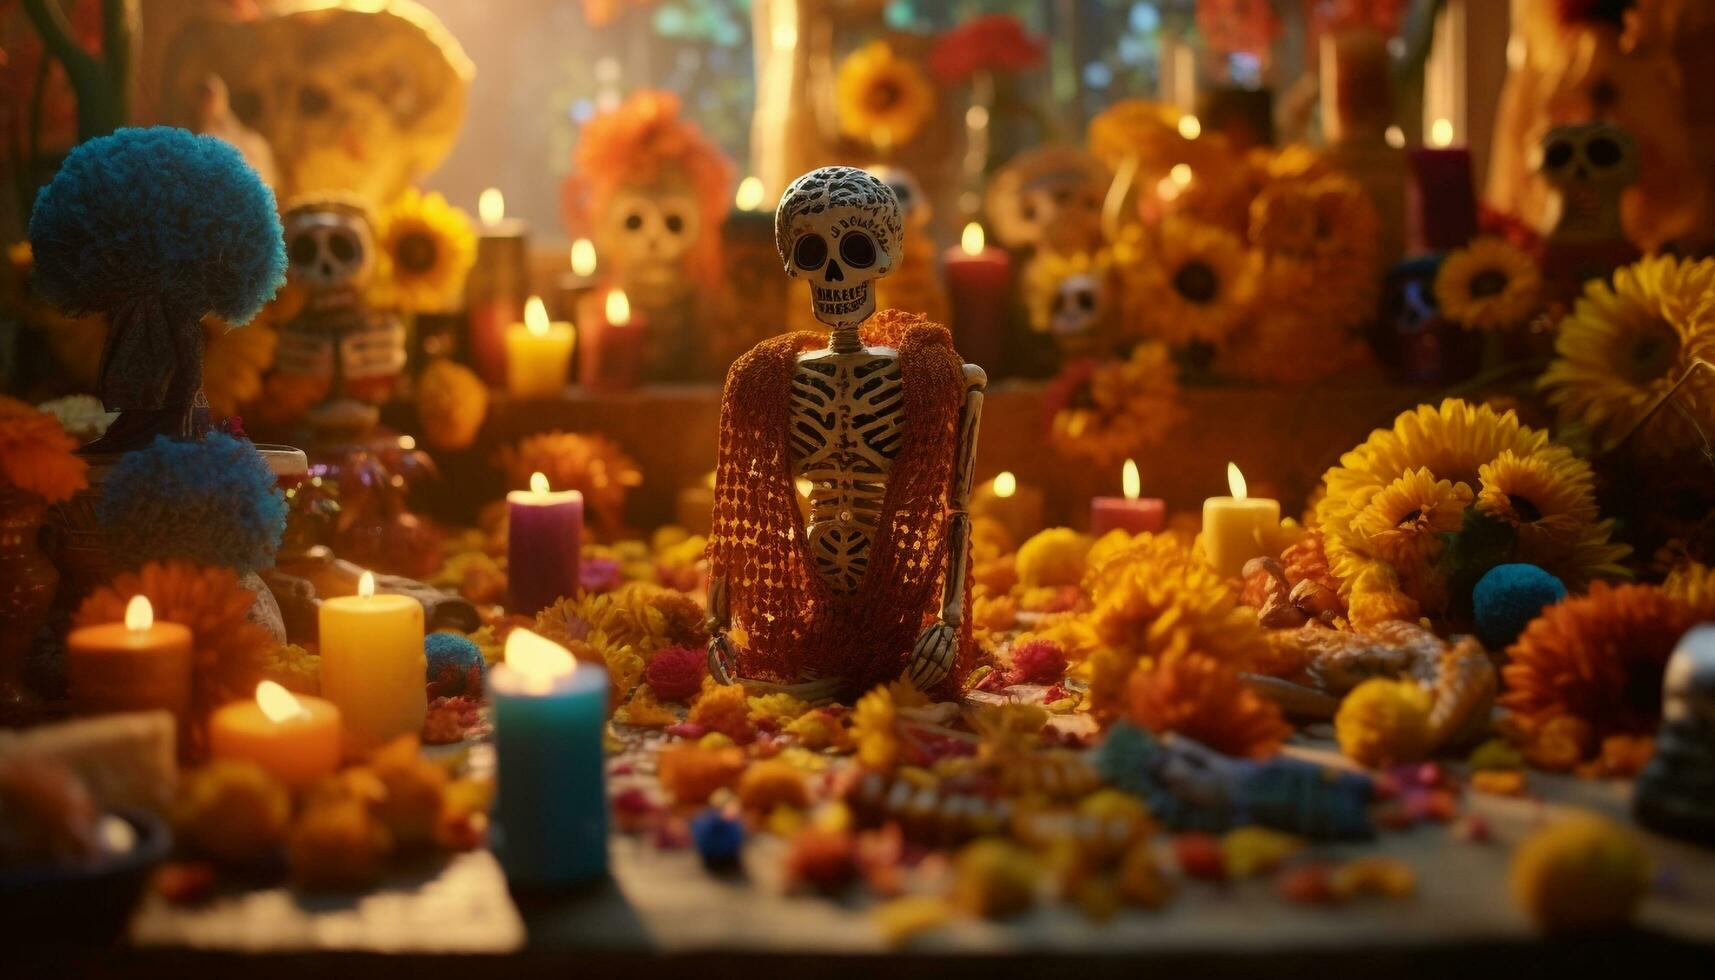 Candlelight glowing, decoration symbolizes spirituality and traditional Halloween celebration generated by AI photo